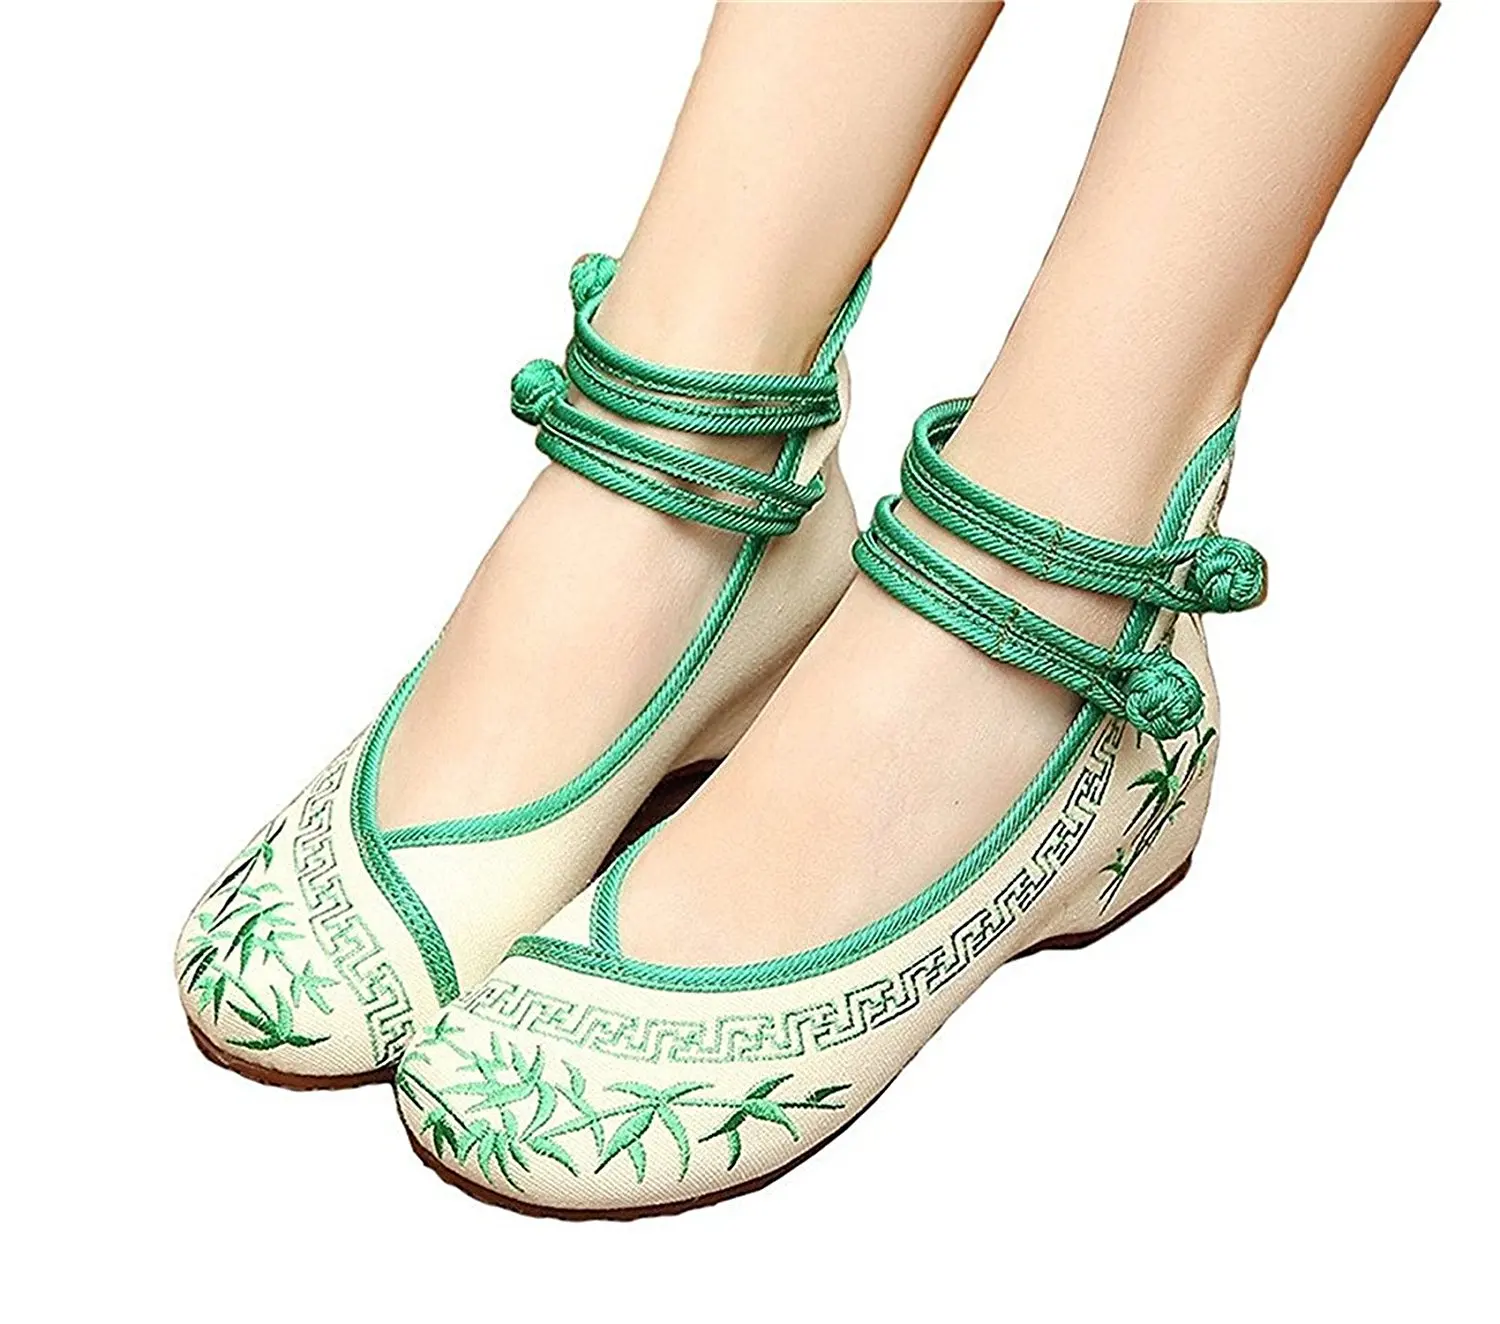 33 Casual Buy bamboo shoes for All Gendre